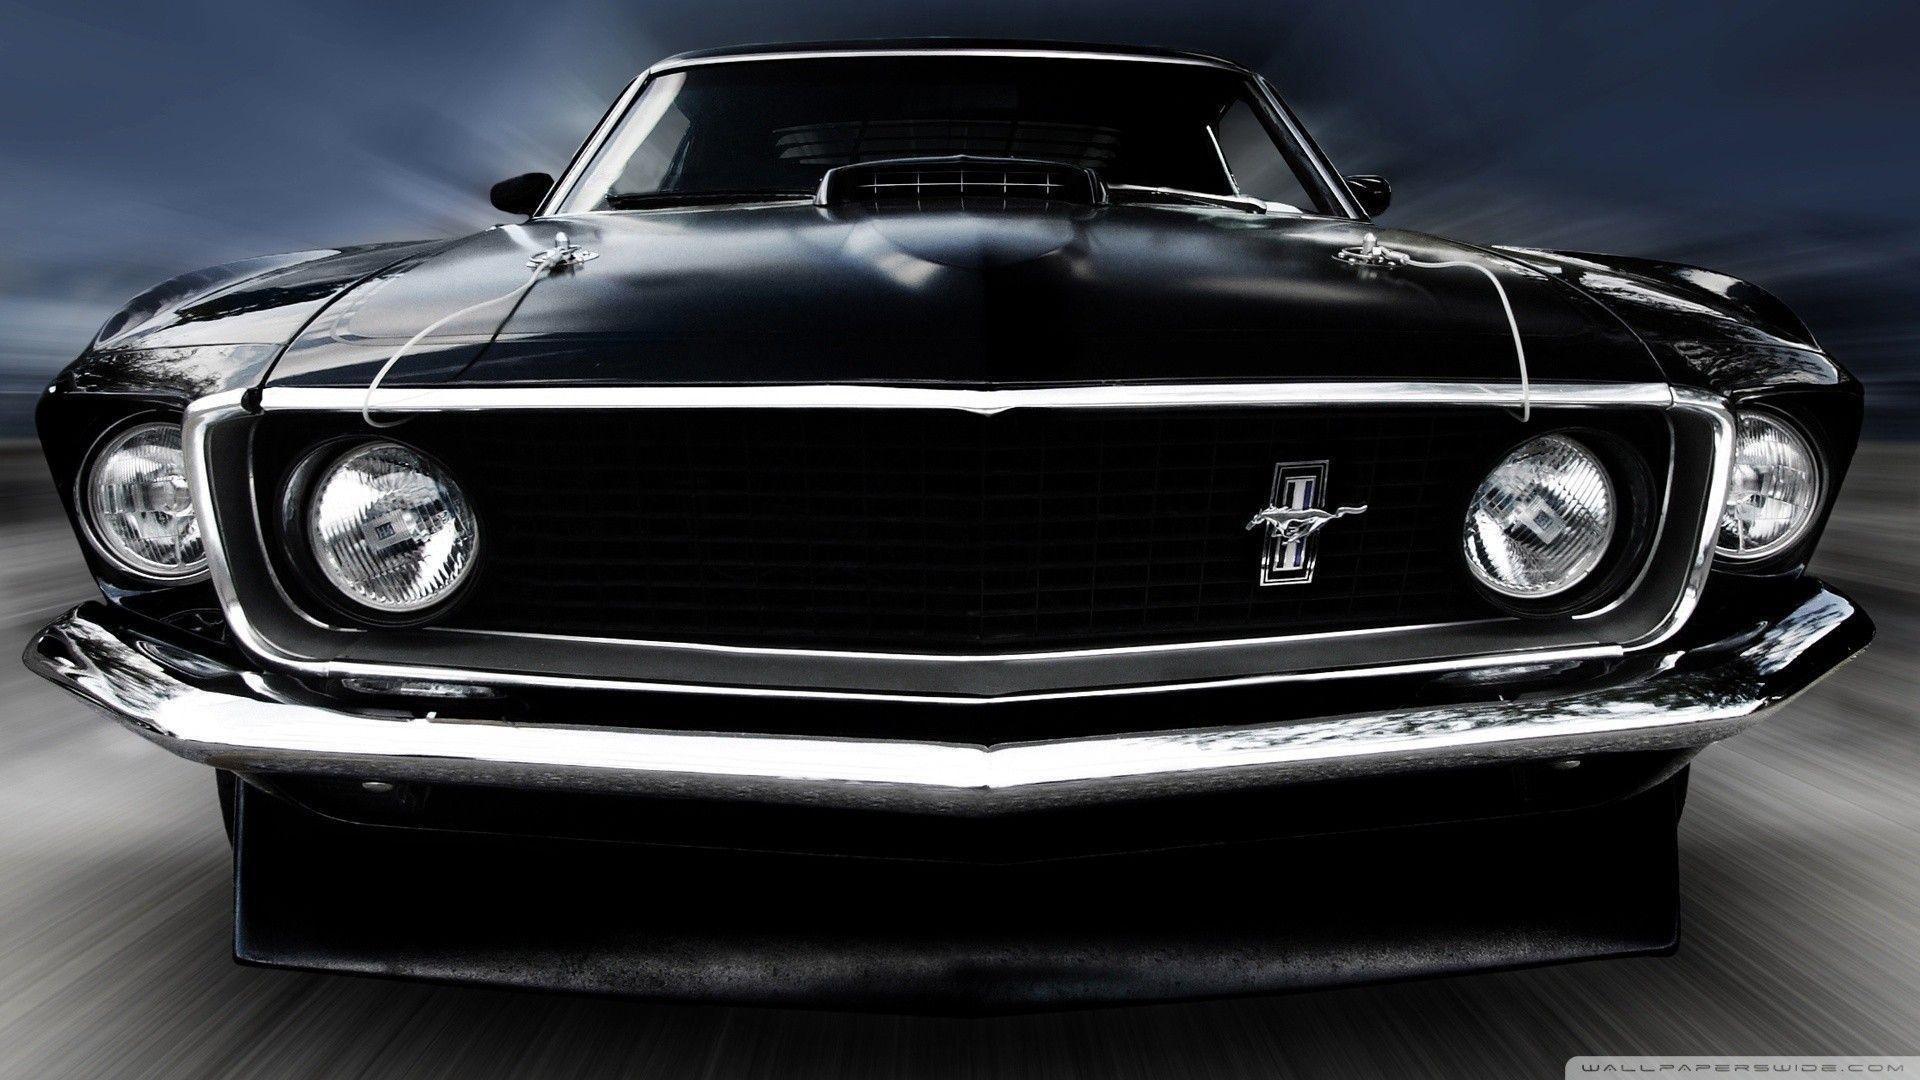 Old chevy muscle cars widescreen HD wallpaper amagico